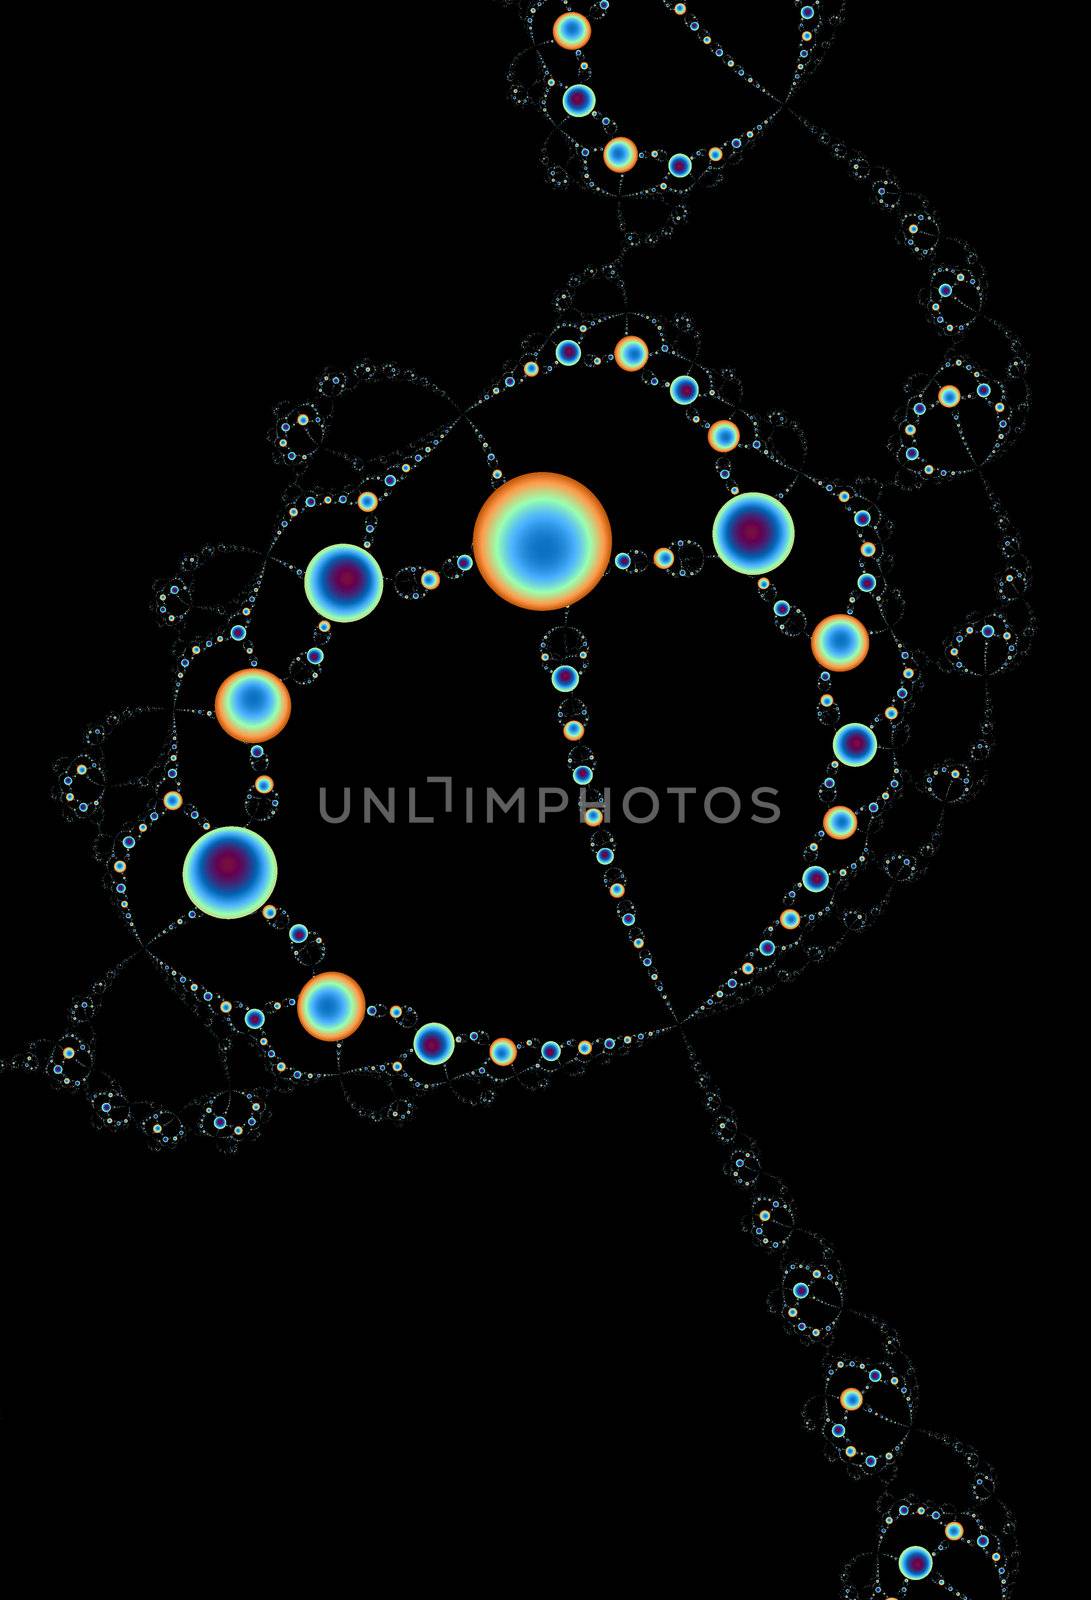 Spirals and beads drifting off into space.  Abstract fractal image.